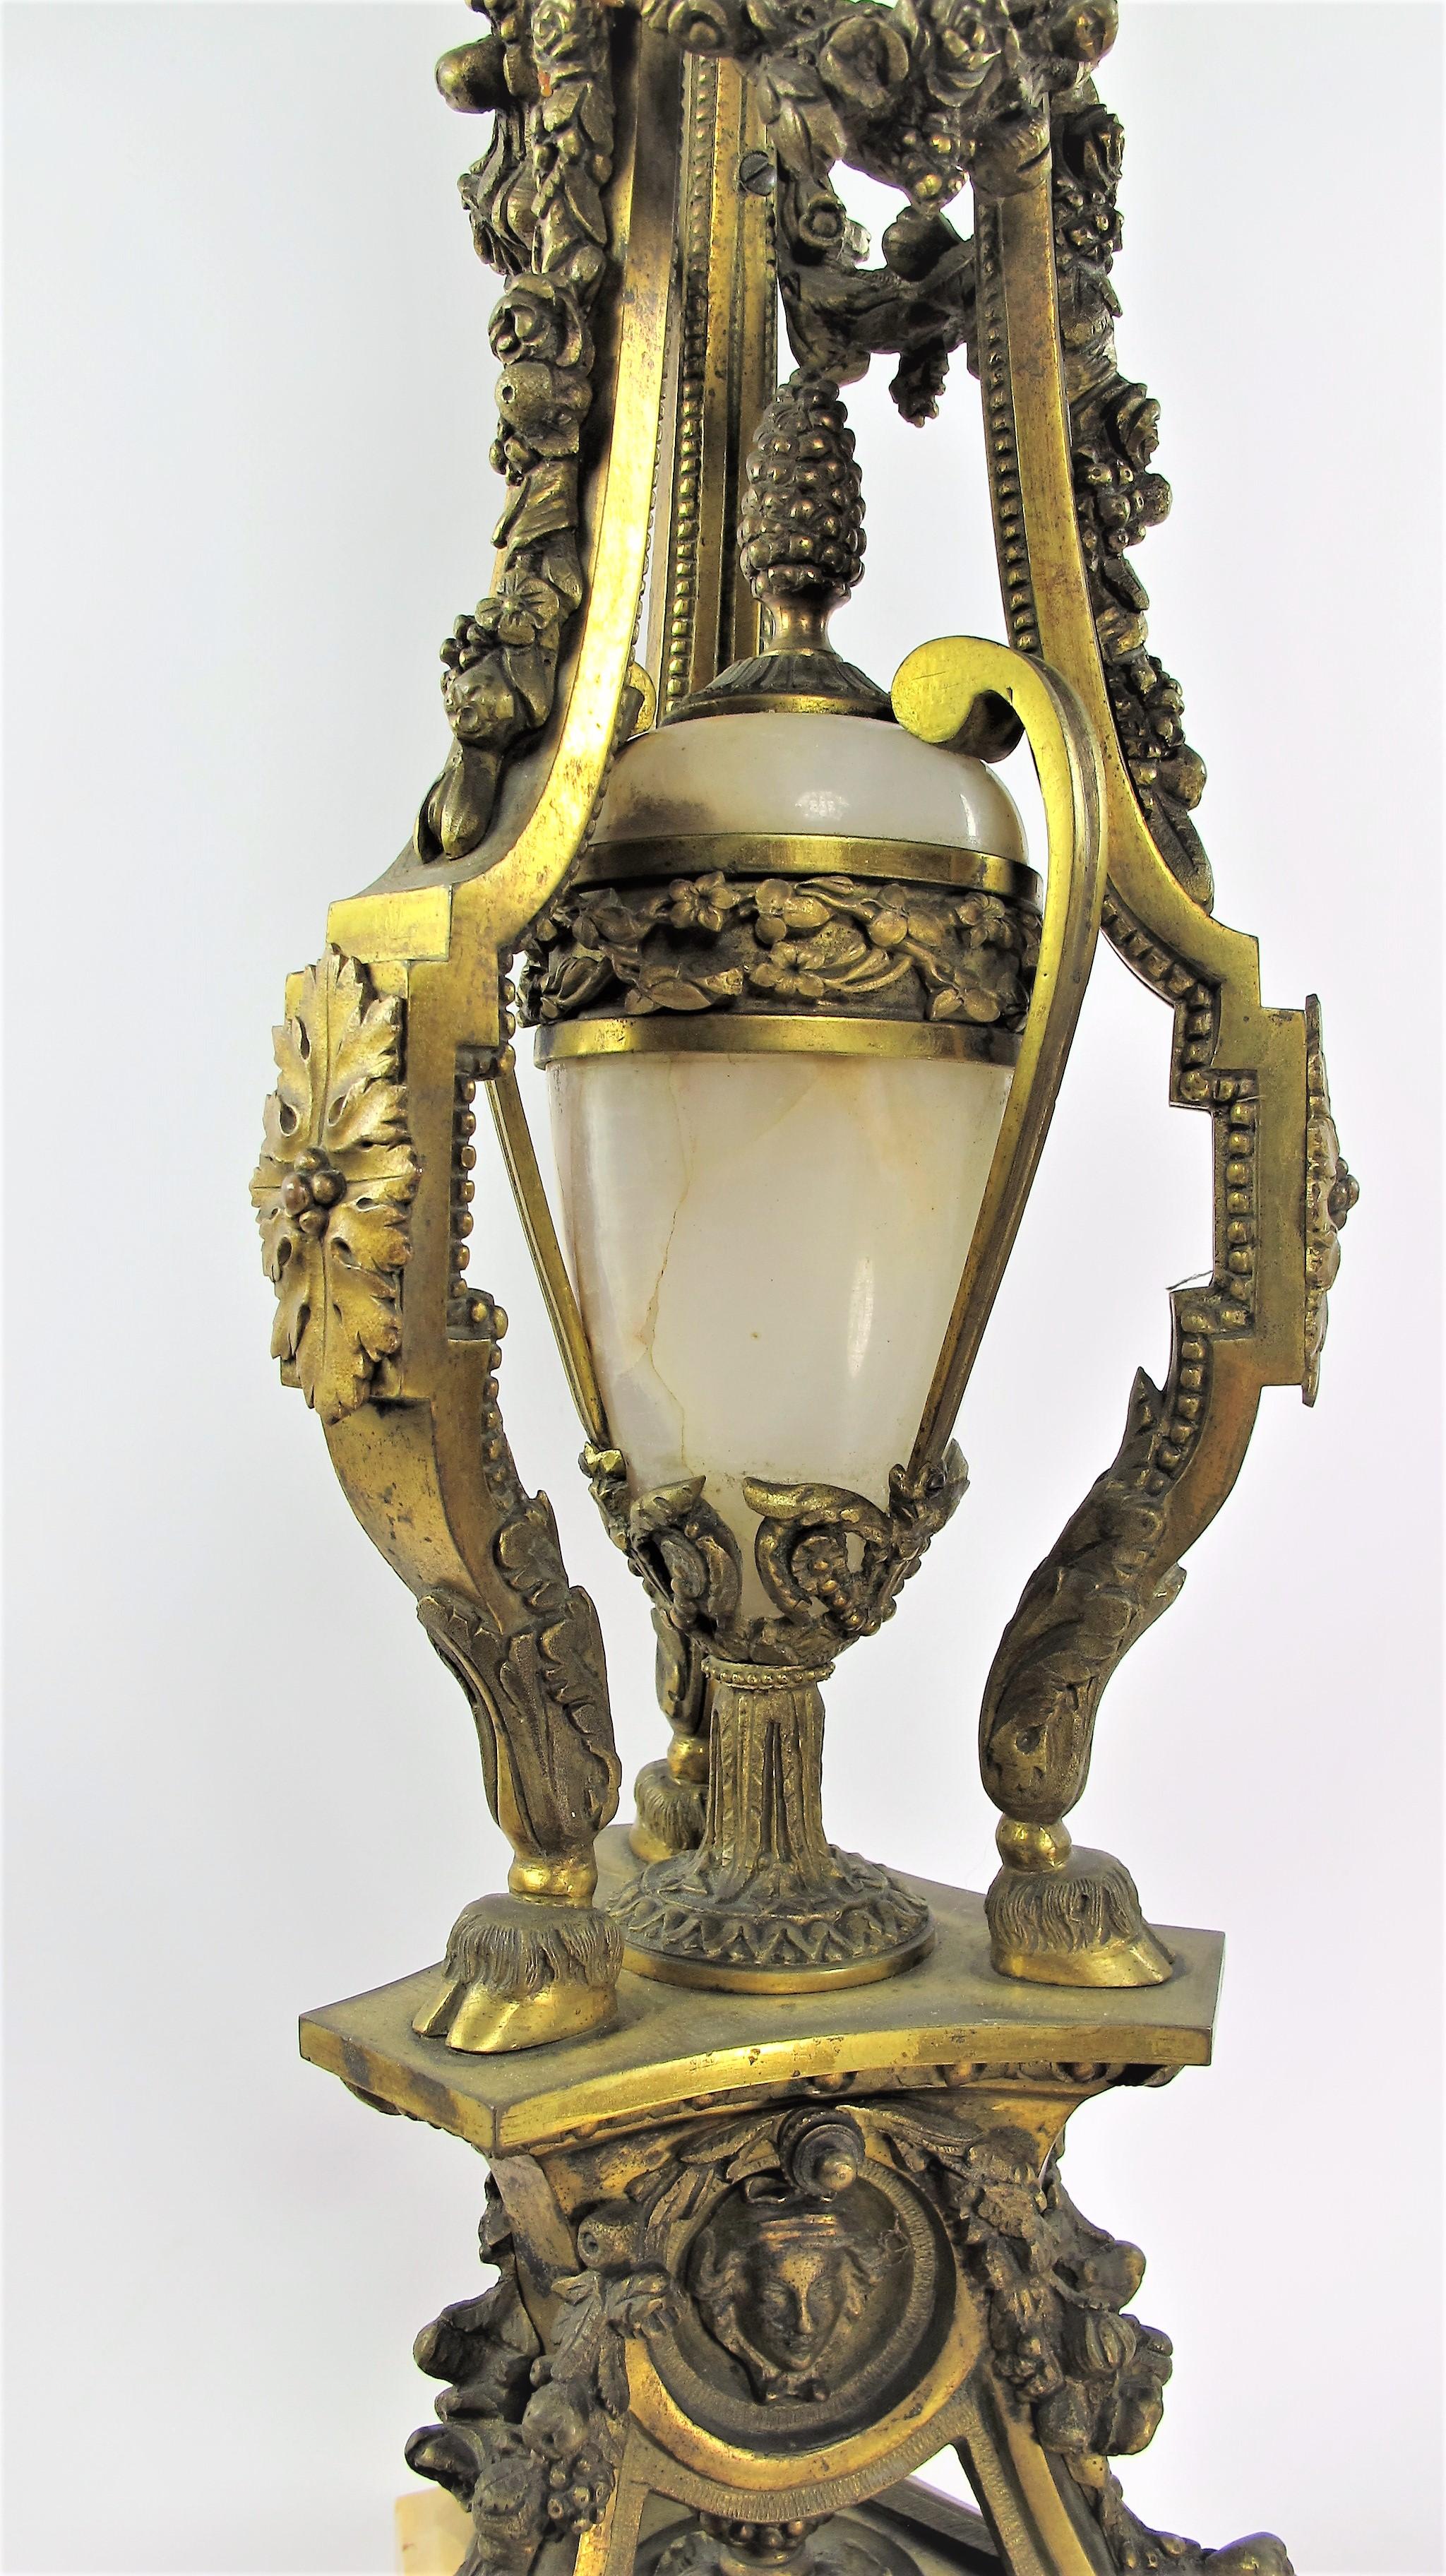 Neoclassical Large Living Room Lamp in Gilt-Bronze and Onyx, by Léon Marchand (1831-1899) For Sale